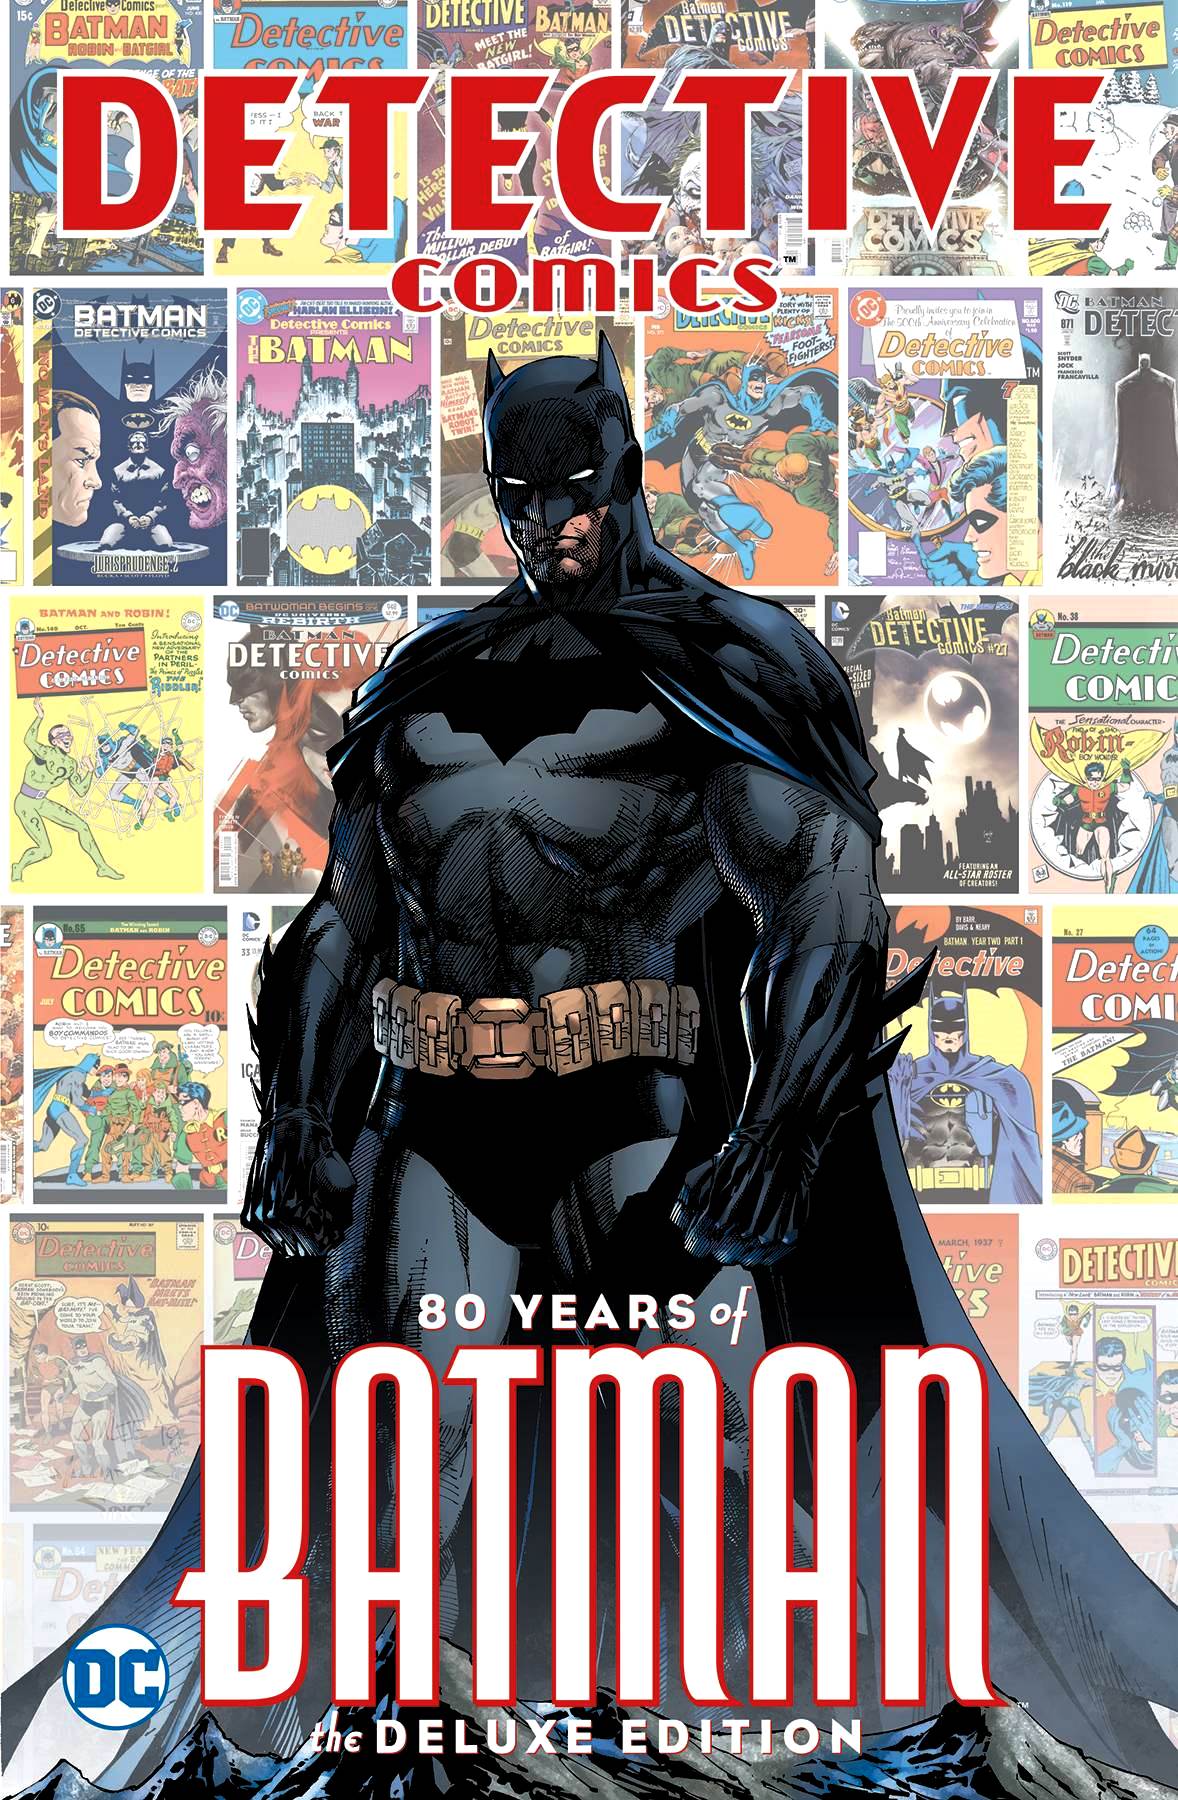 Detective Comics: 80 Years of Batman - The Deluxe Edition HC